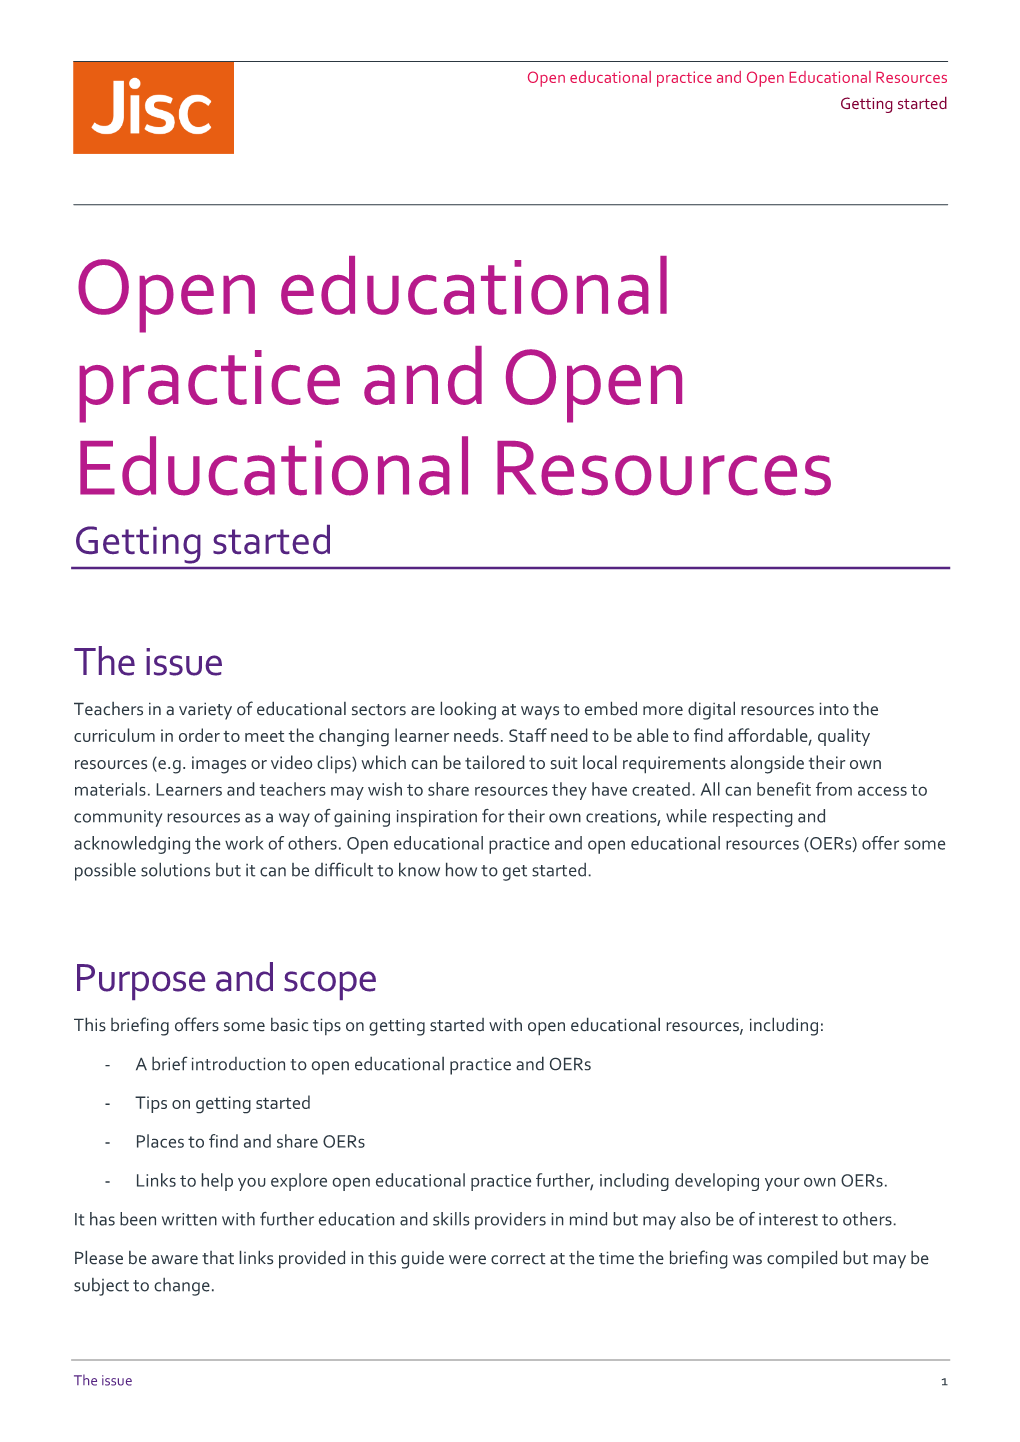 Open Educational Practice and Open Educational Resources Getting Started